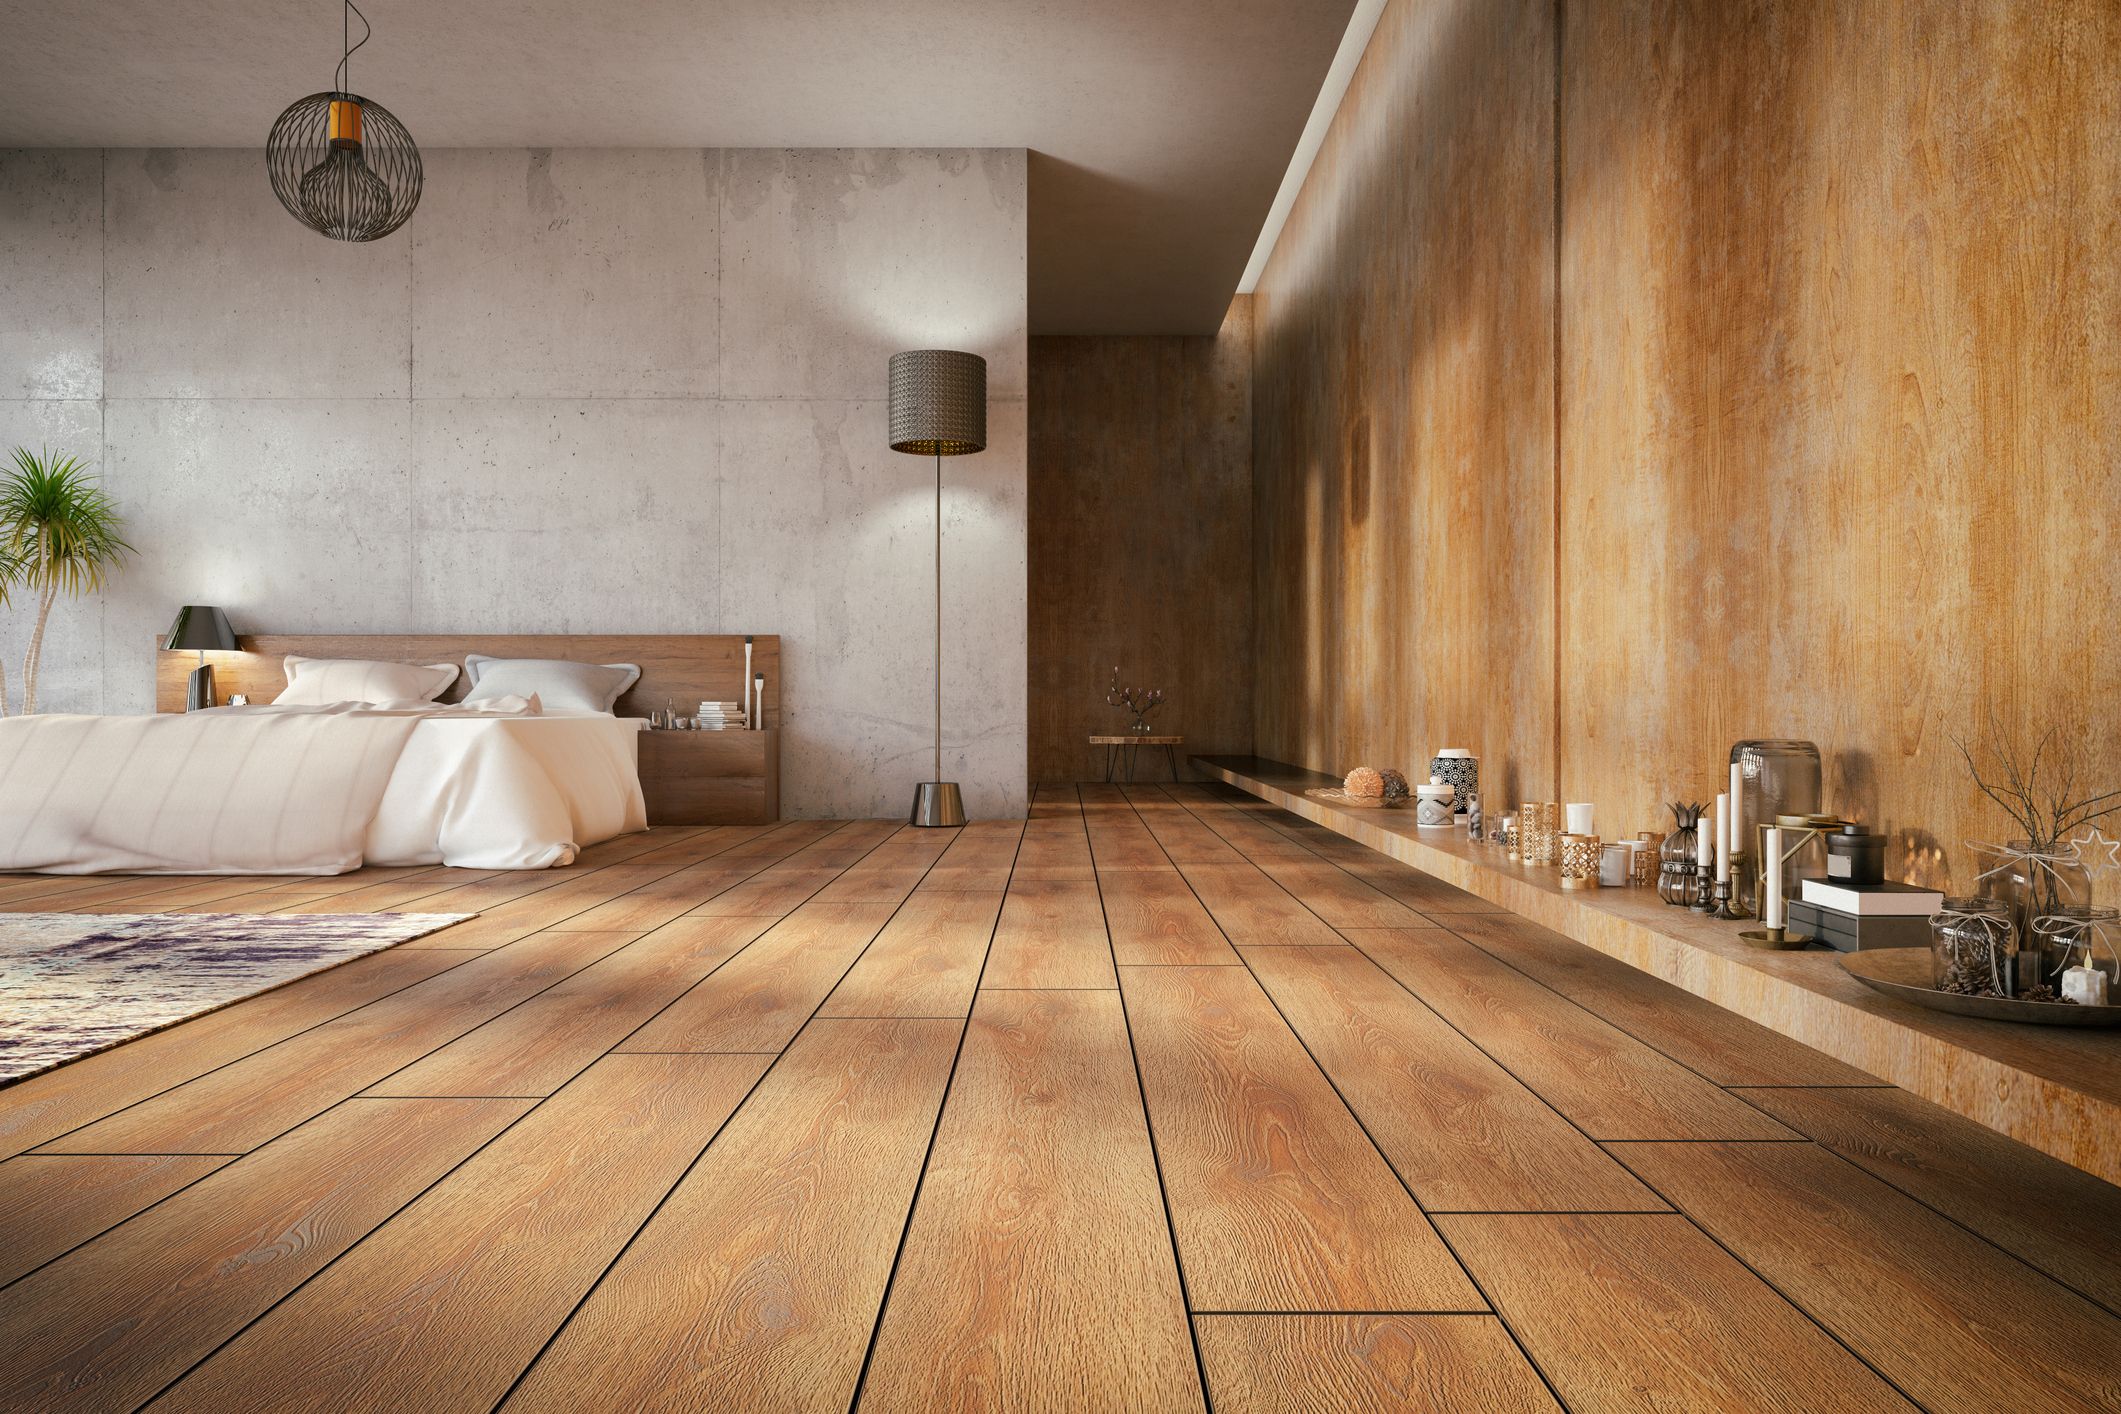 4 Important Questions to Ask When Shopping for Wood Flooring